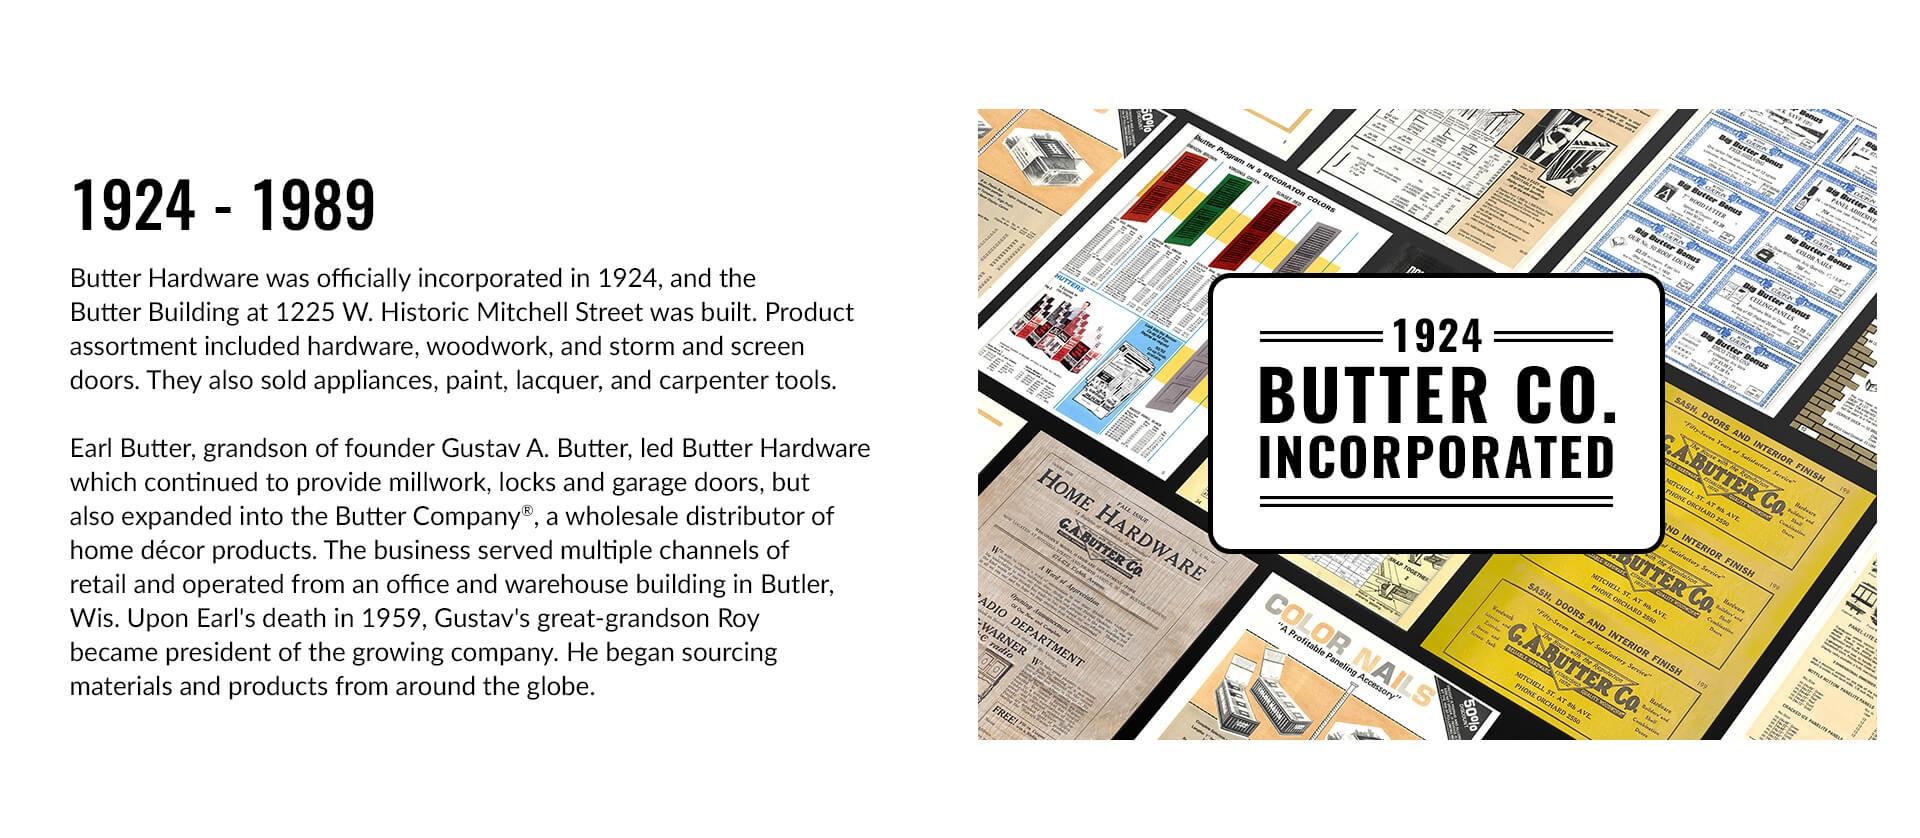 The Butter Company hardware grew, with Gustav's son and grandson taking over